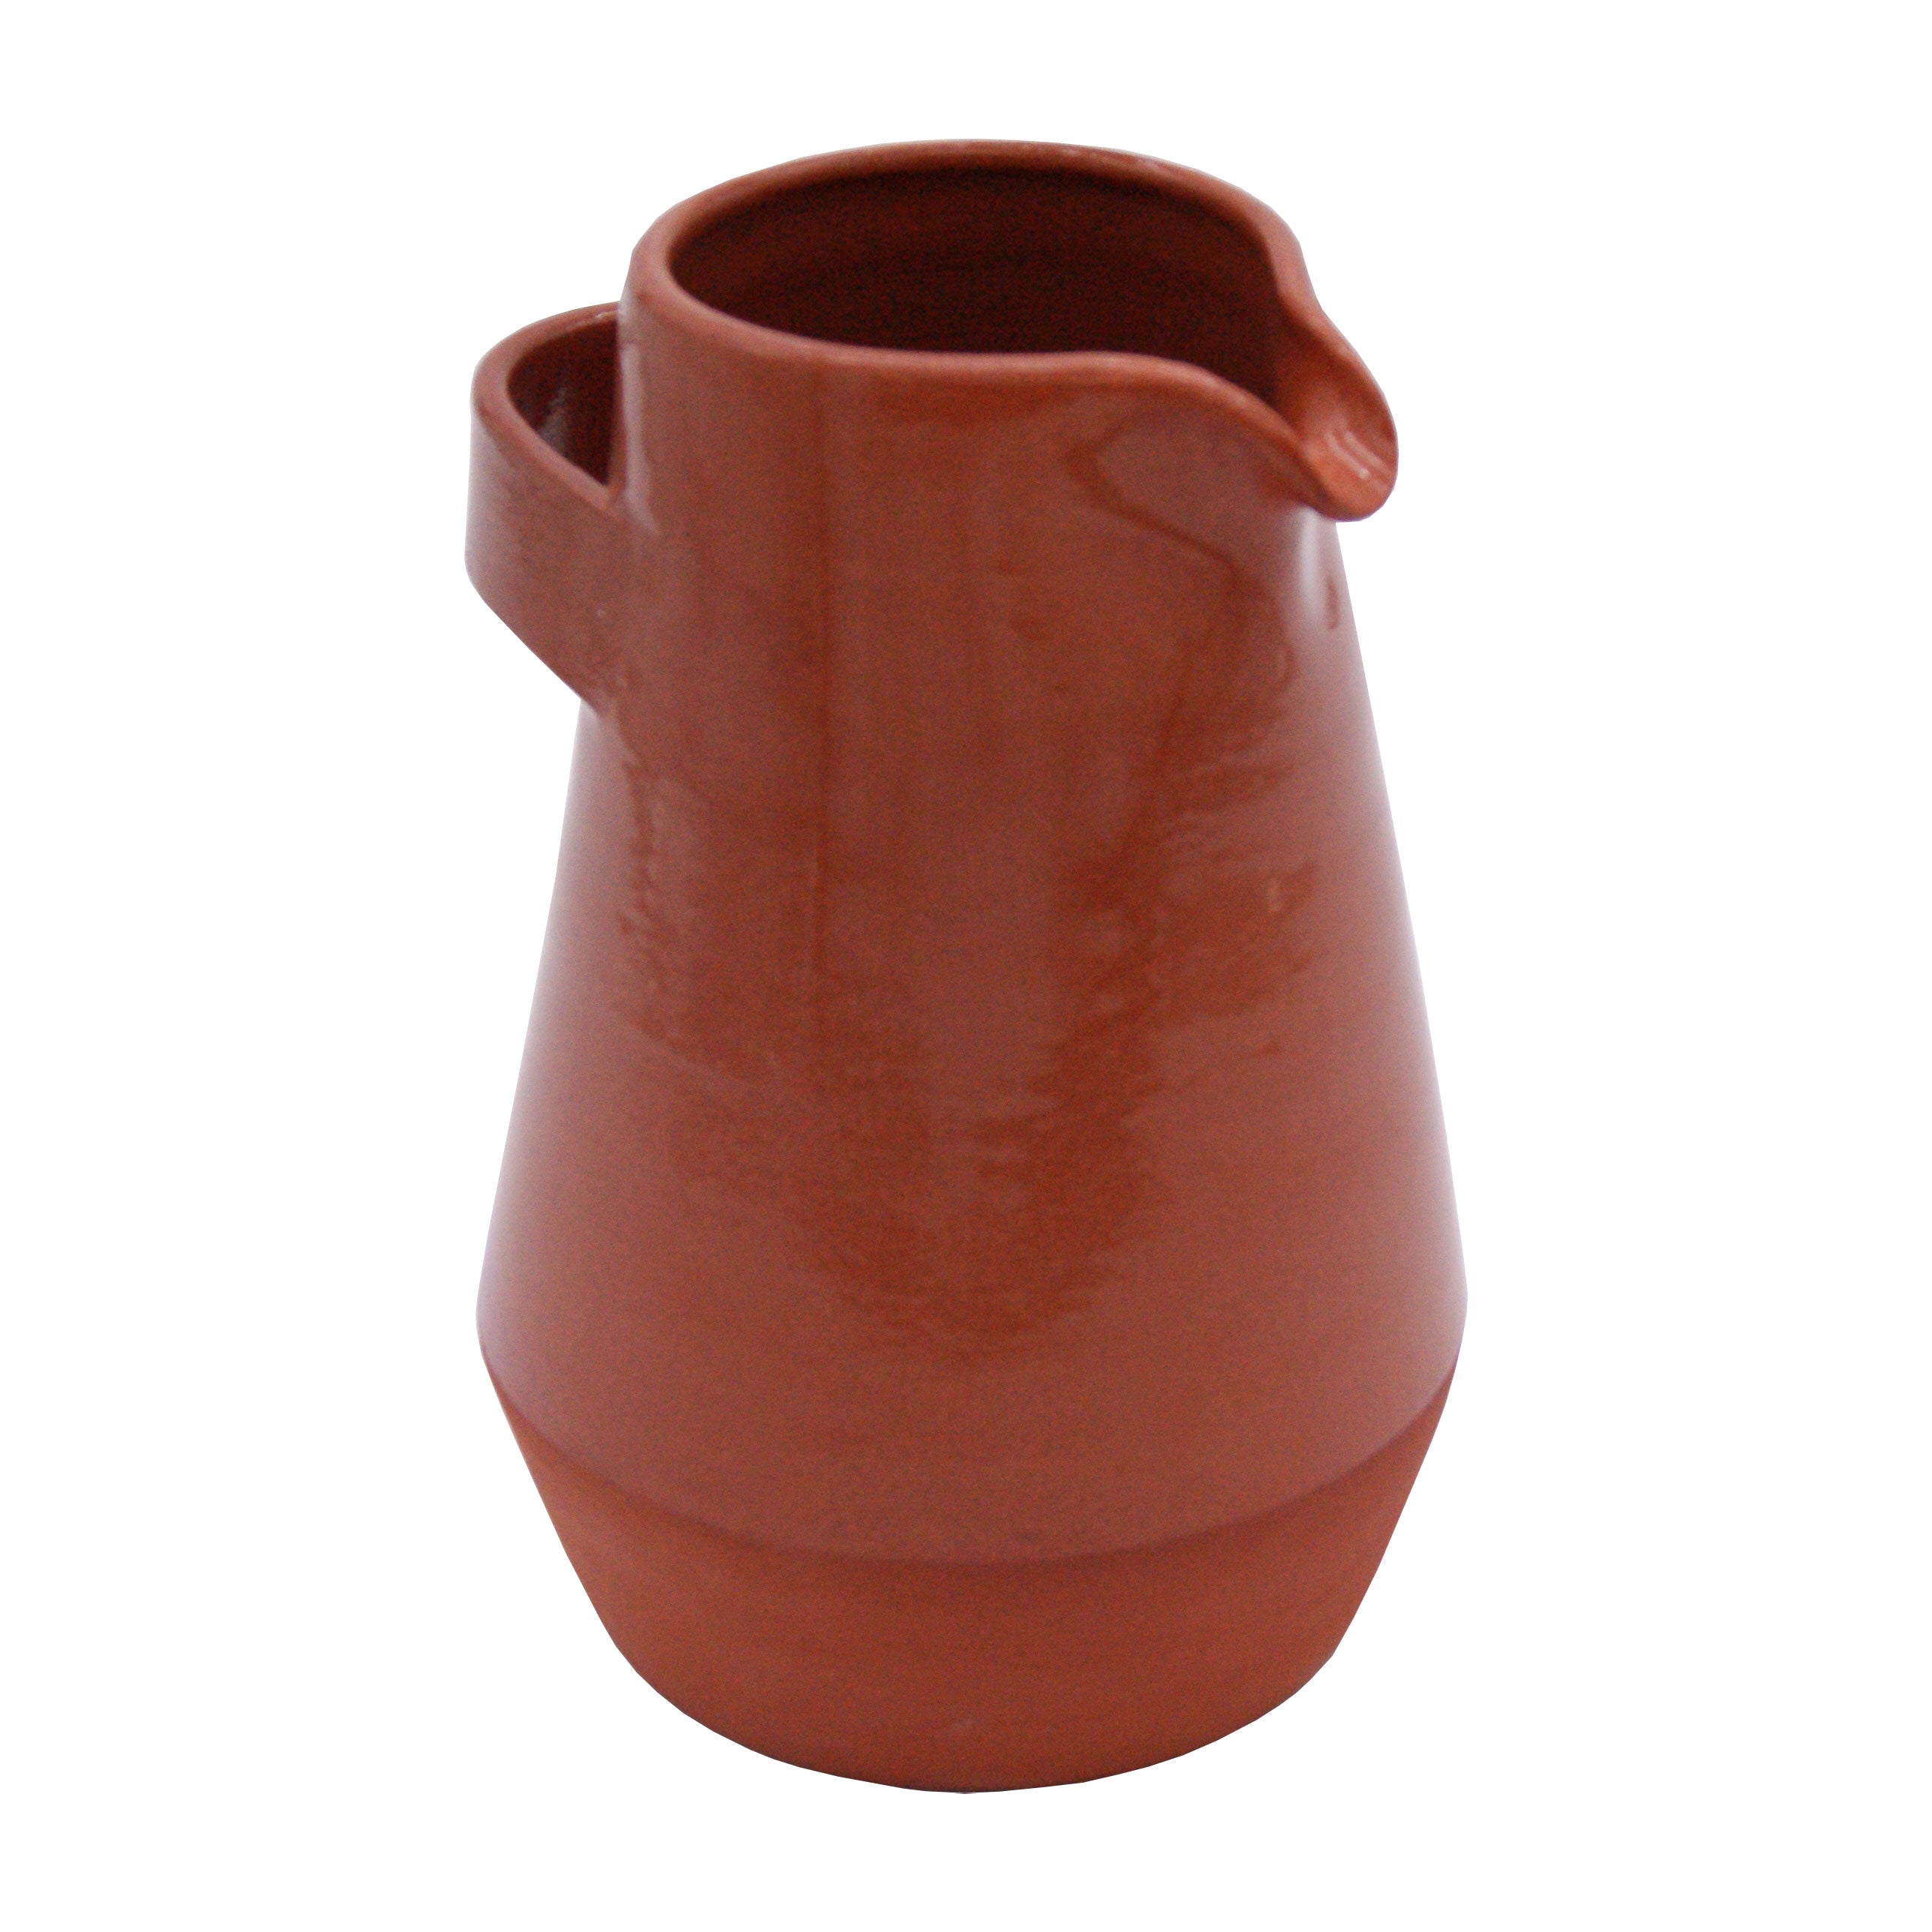 Handmade traditional portuguese pottery pitcher .